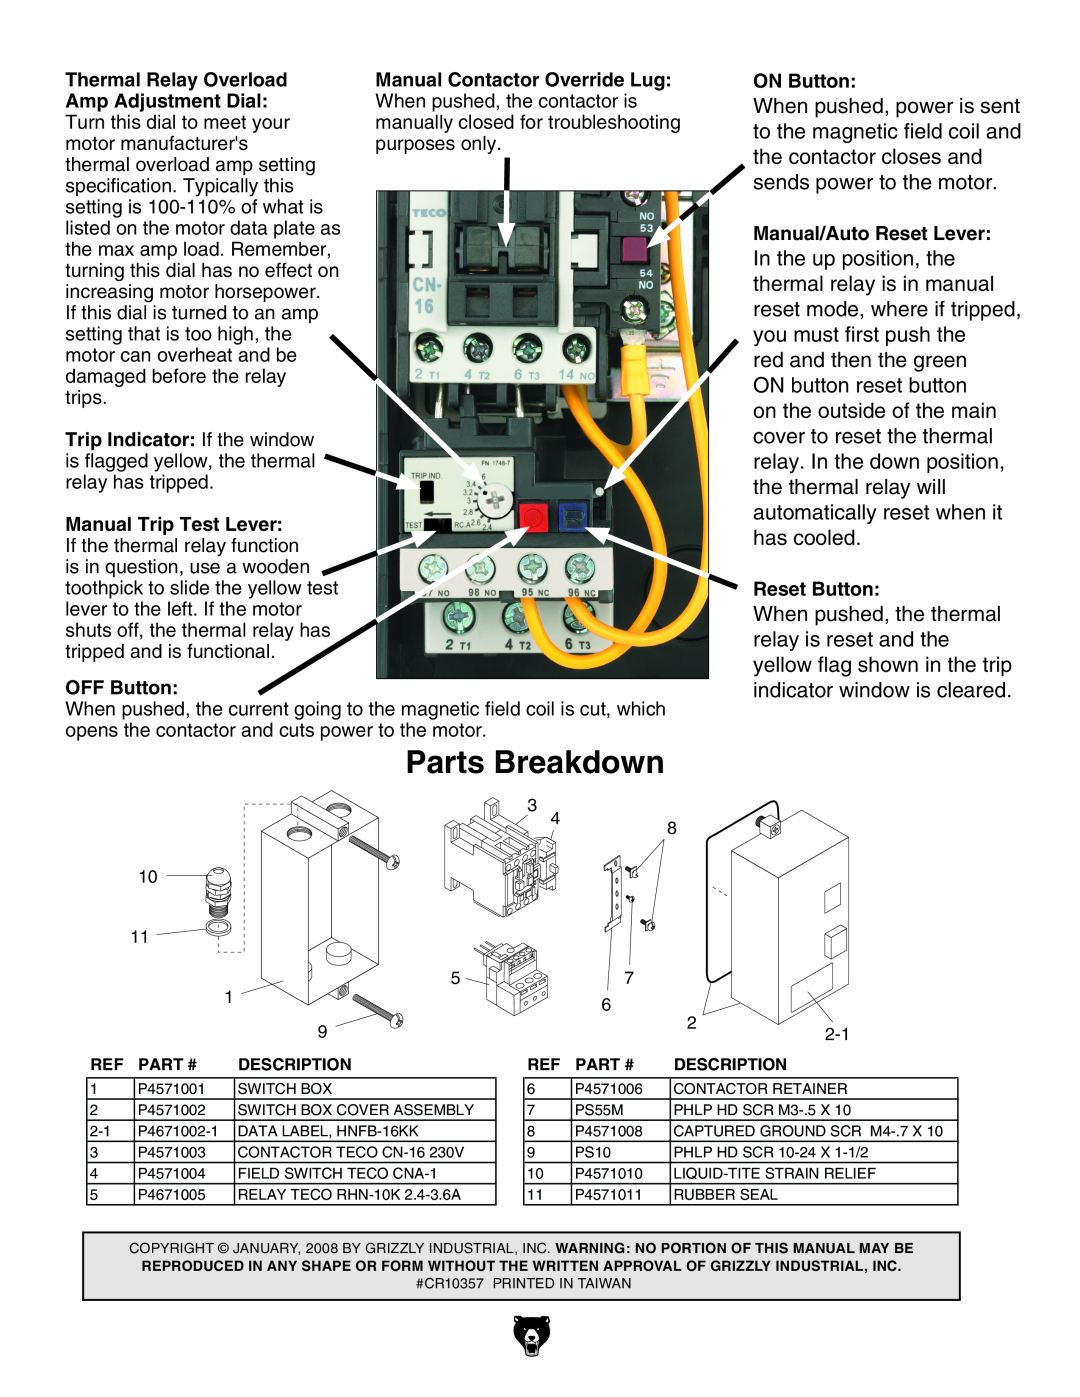 Grizzly G4671 instruction sheet Parts Breakdown 